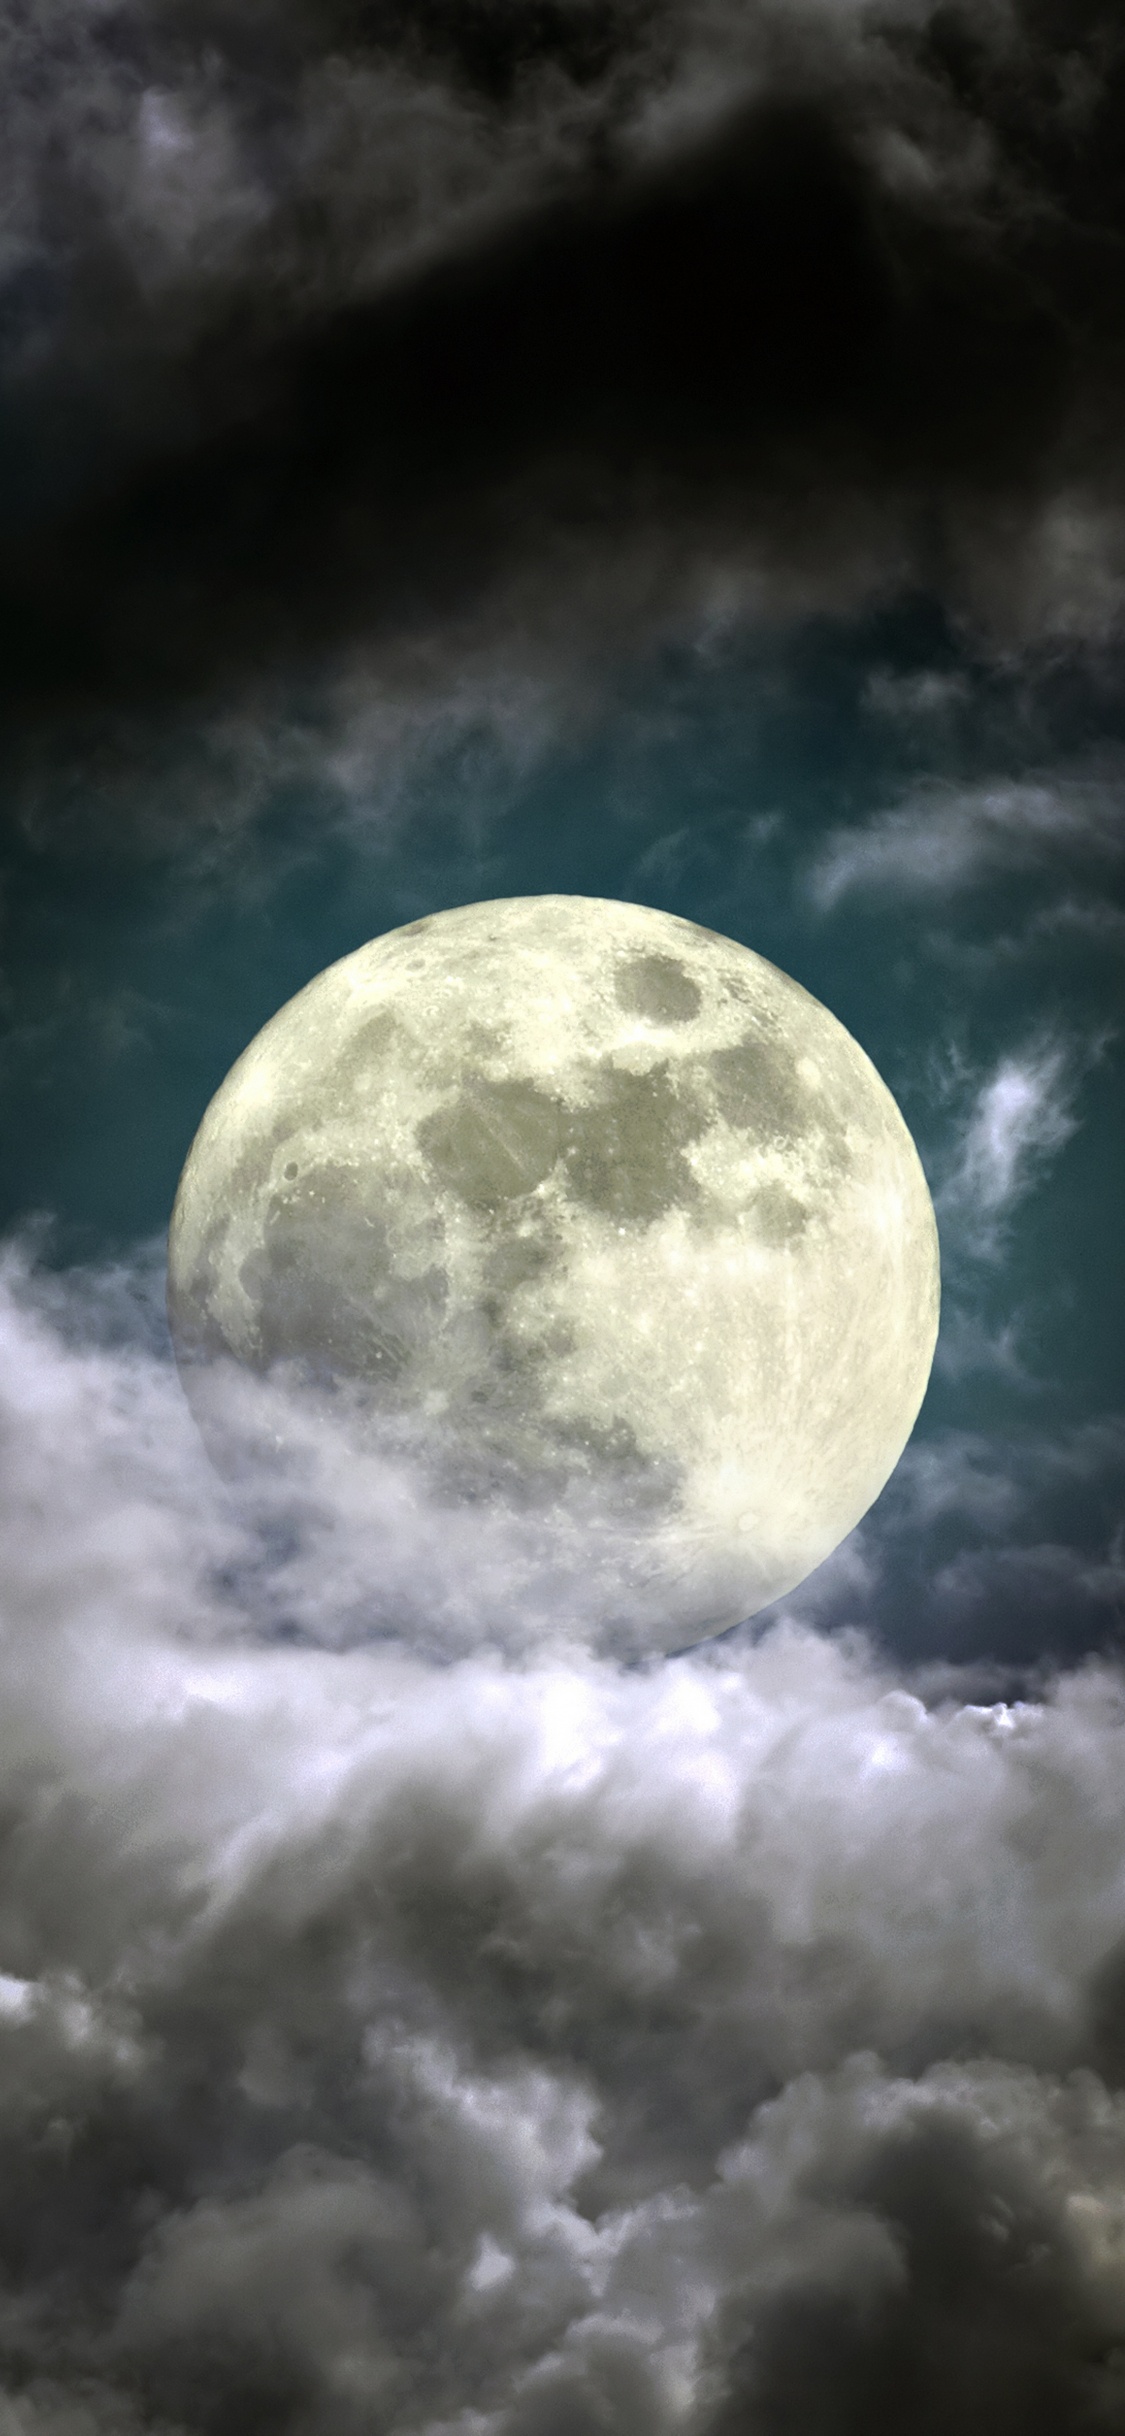 Full Moon in The Sky. Wallpaper in 1125x2436 Resolution